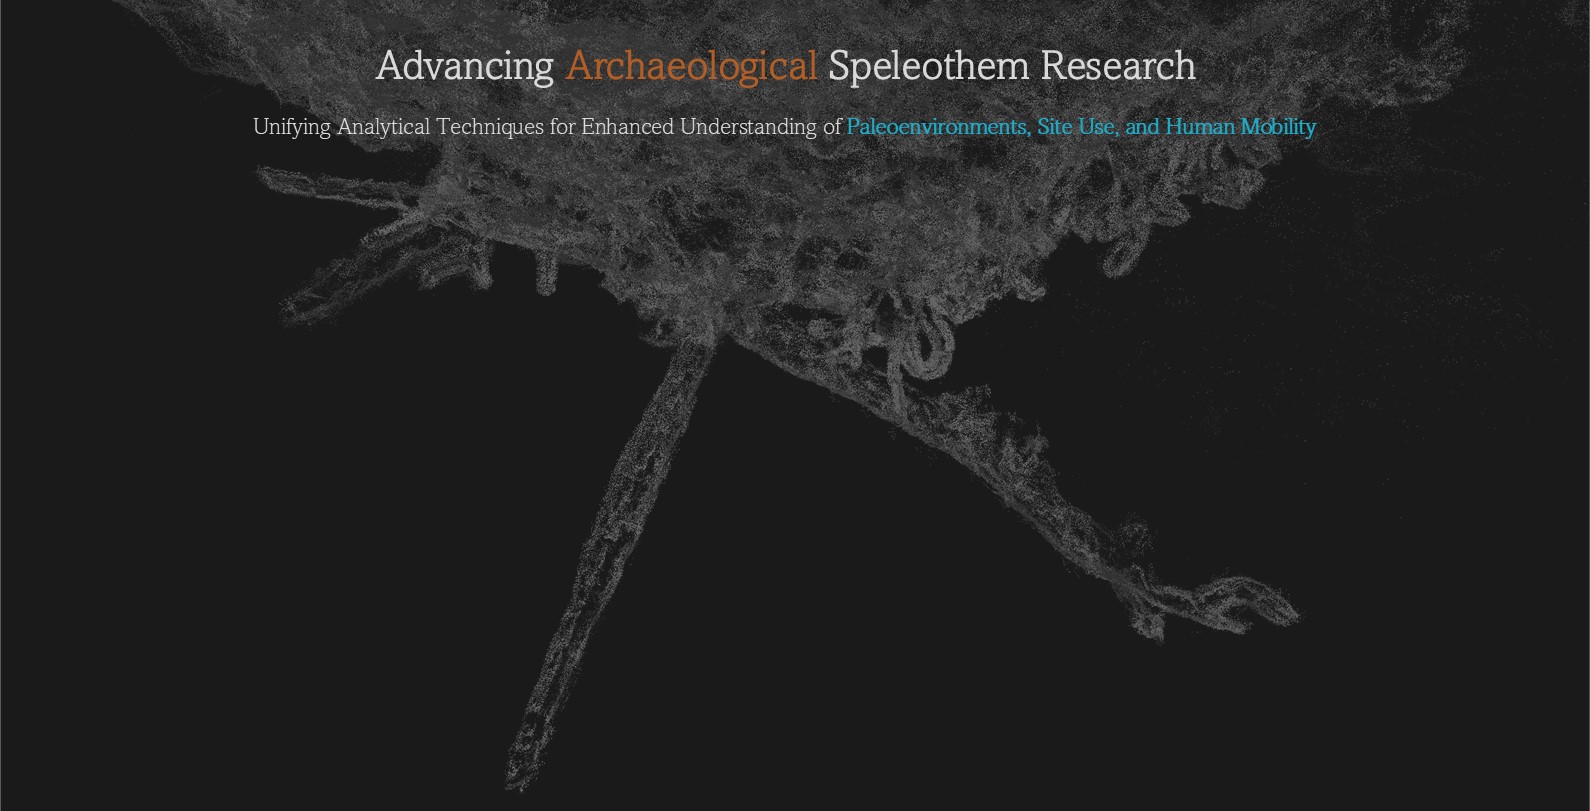 Advancing Archaeological Speleothem Research & Its Future Role In Cave Digs